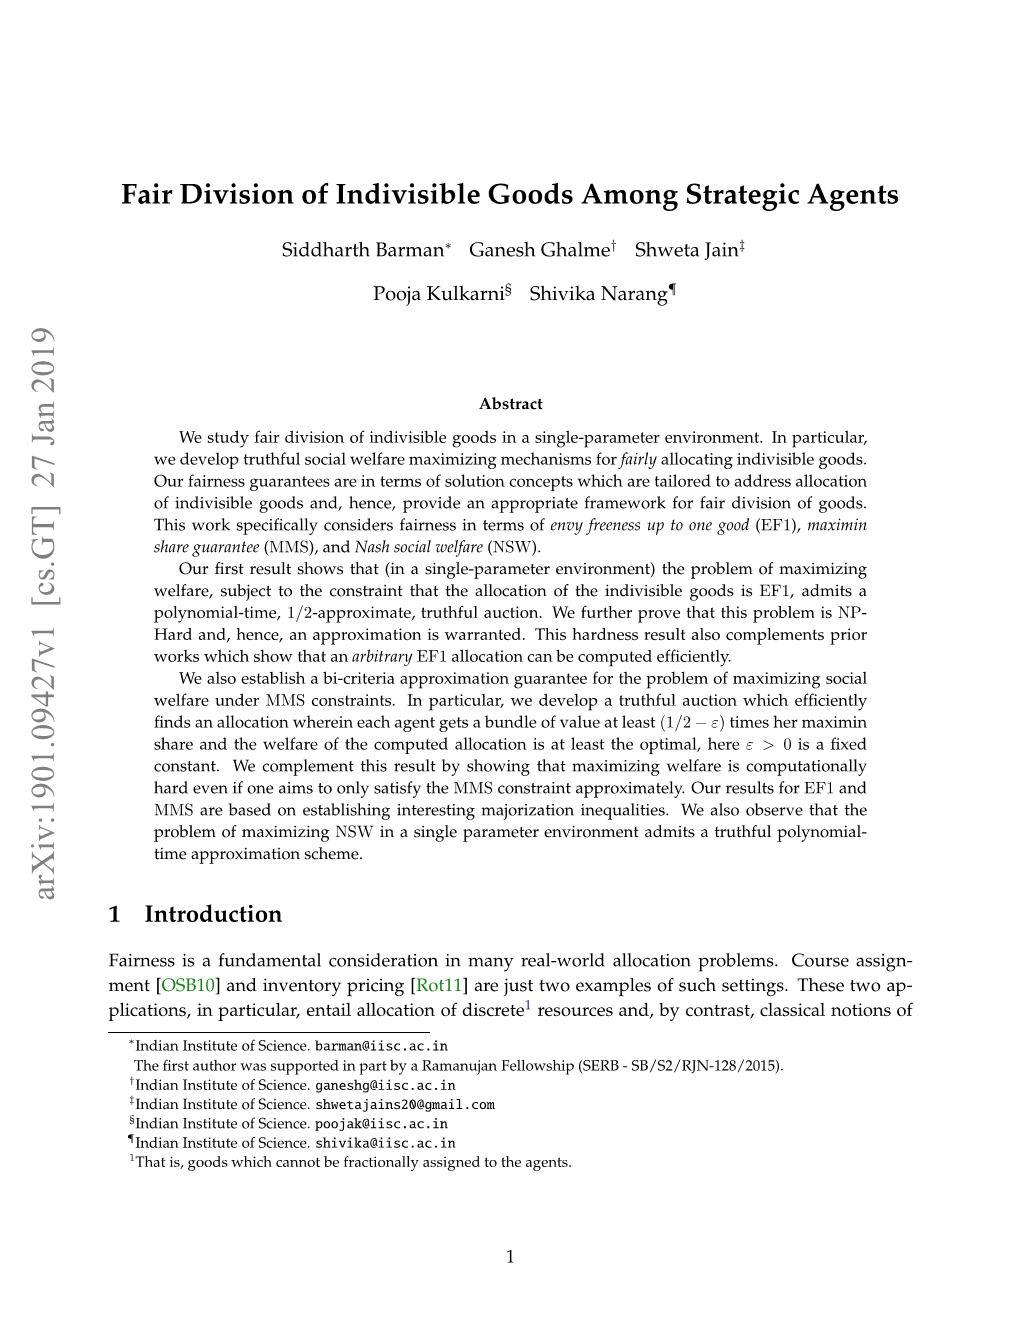 Fair Division of Indivisible Goods Among Strategic Agents